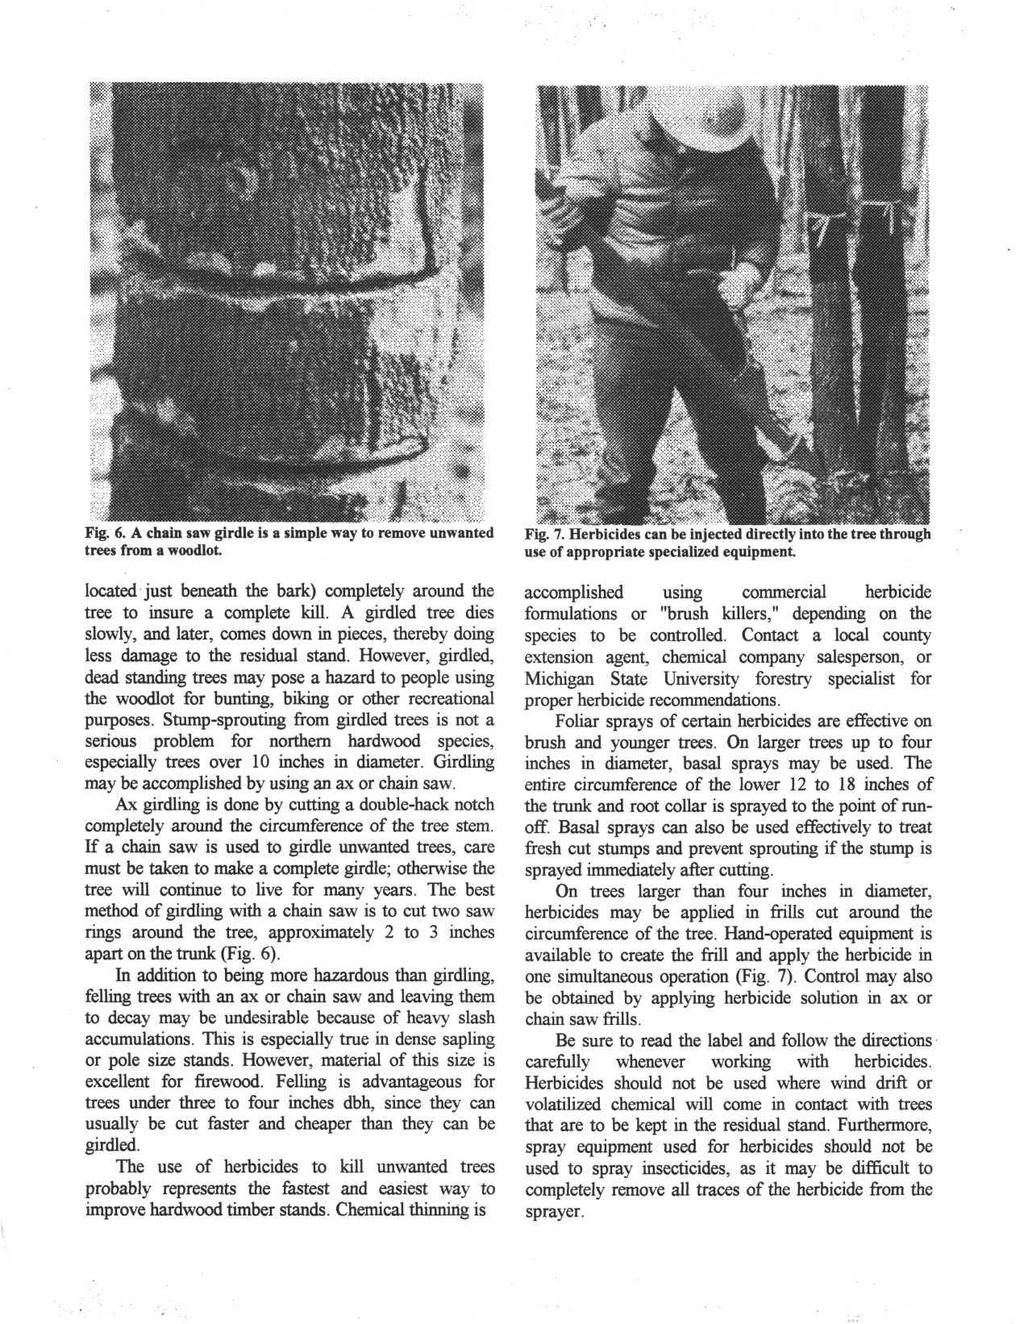 Fig. 6. A chain saw girdle is a simple way to remove unwanted trees from a woodlot located just beneath the bark) completely around the tree to insure a complete kill.